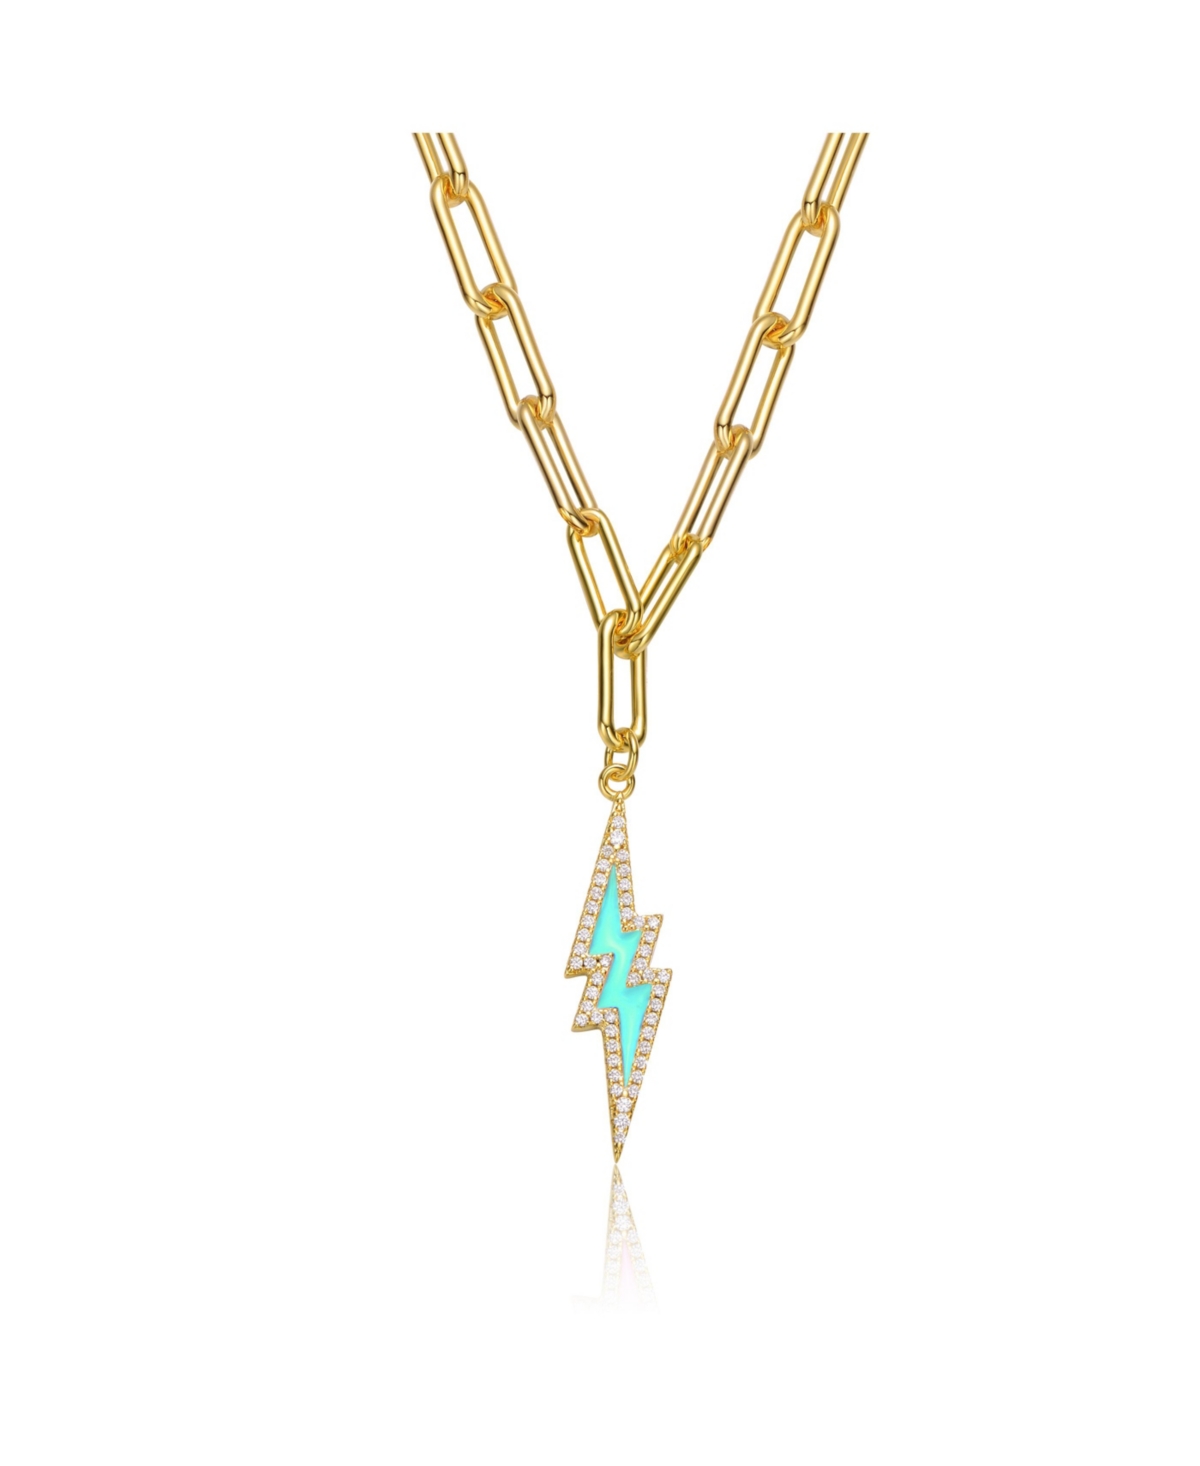 Gigi Girl Elegant Young Adults 14K Gold Plated with Colored Cubic Zirconia Charm Necklace - Blue